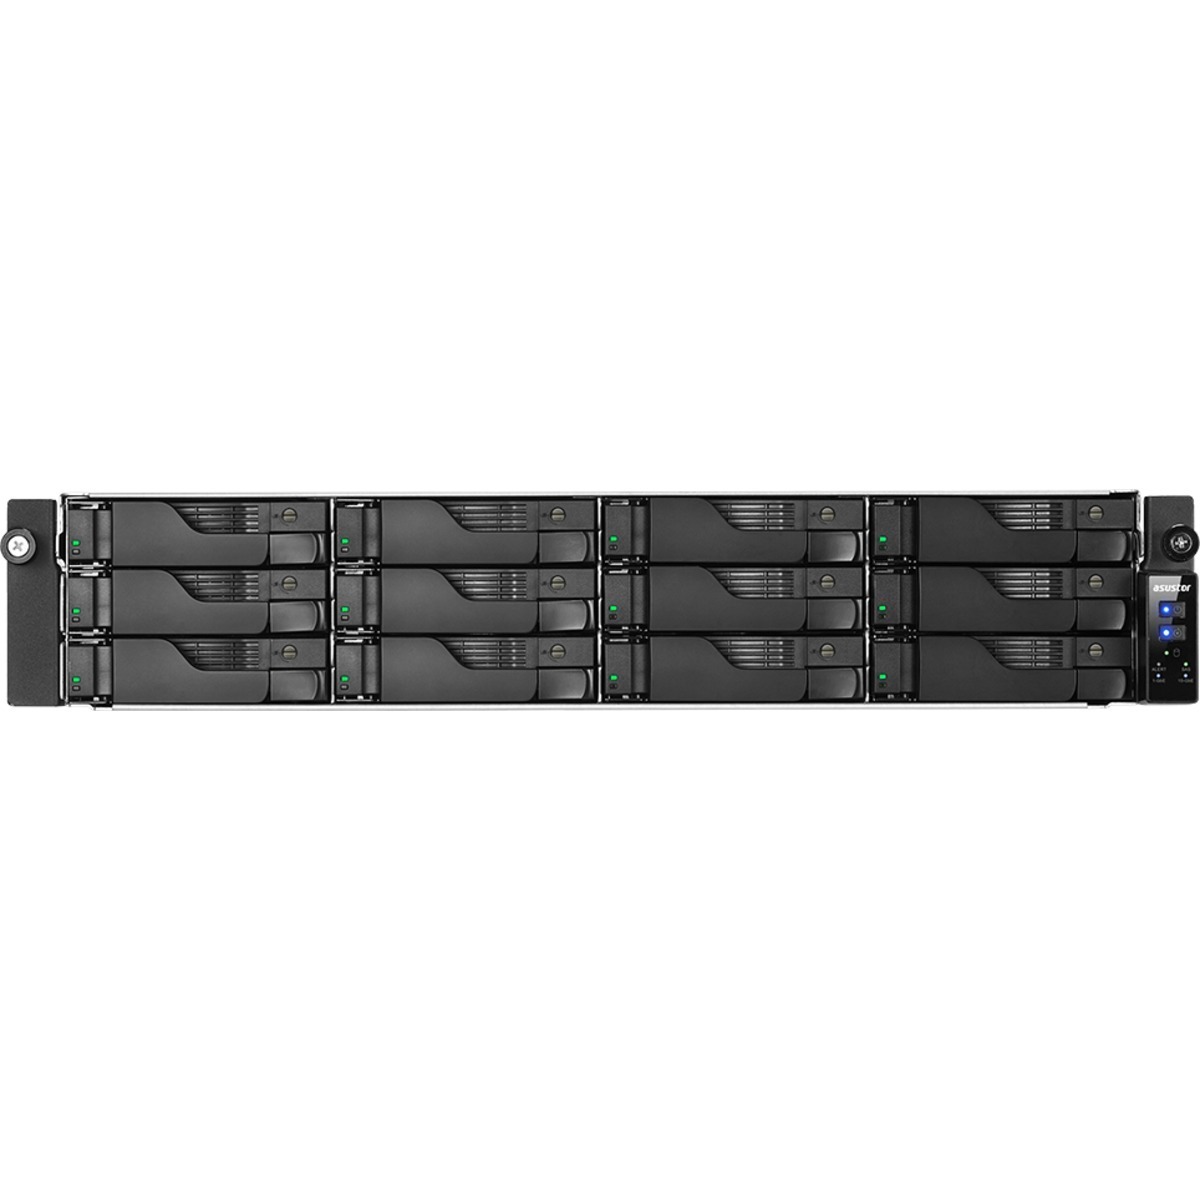 ASUSTOR AS7112RDX Lockerstor 12R Pro 80tb 12-Bay RackMount Large Business / Enterprise NAS - Network Attached Storage Device 8x10tb Seagate EXOS X18 ST10000NM018G 3.5 7200rpm SATA 6Gb/s HDD ENTERPRISE Class Drives Installed - Burn-In Tested AS7112RDX Lockerstor 12R Pro